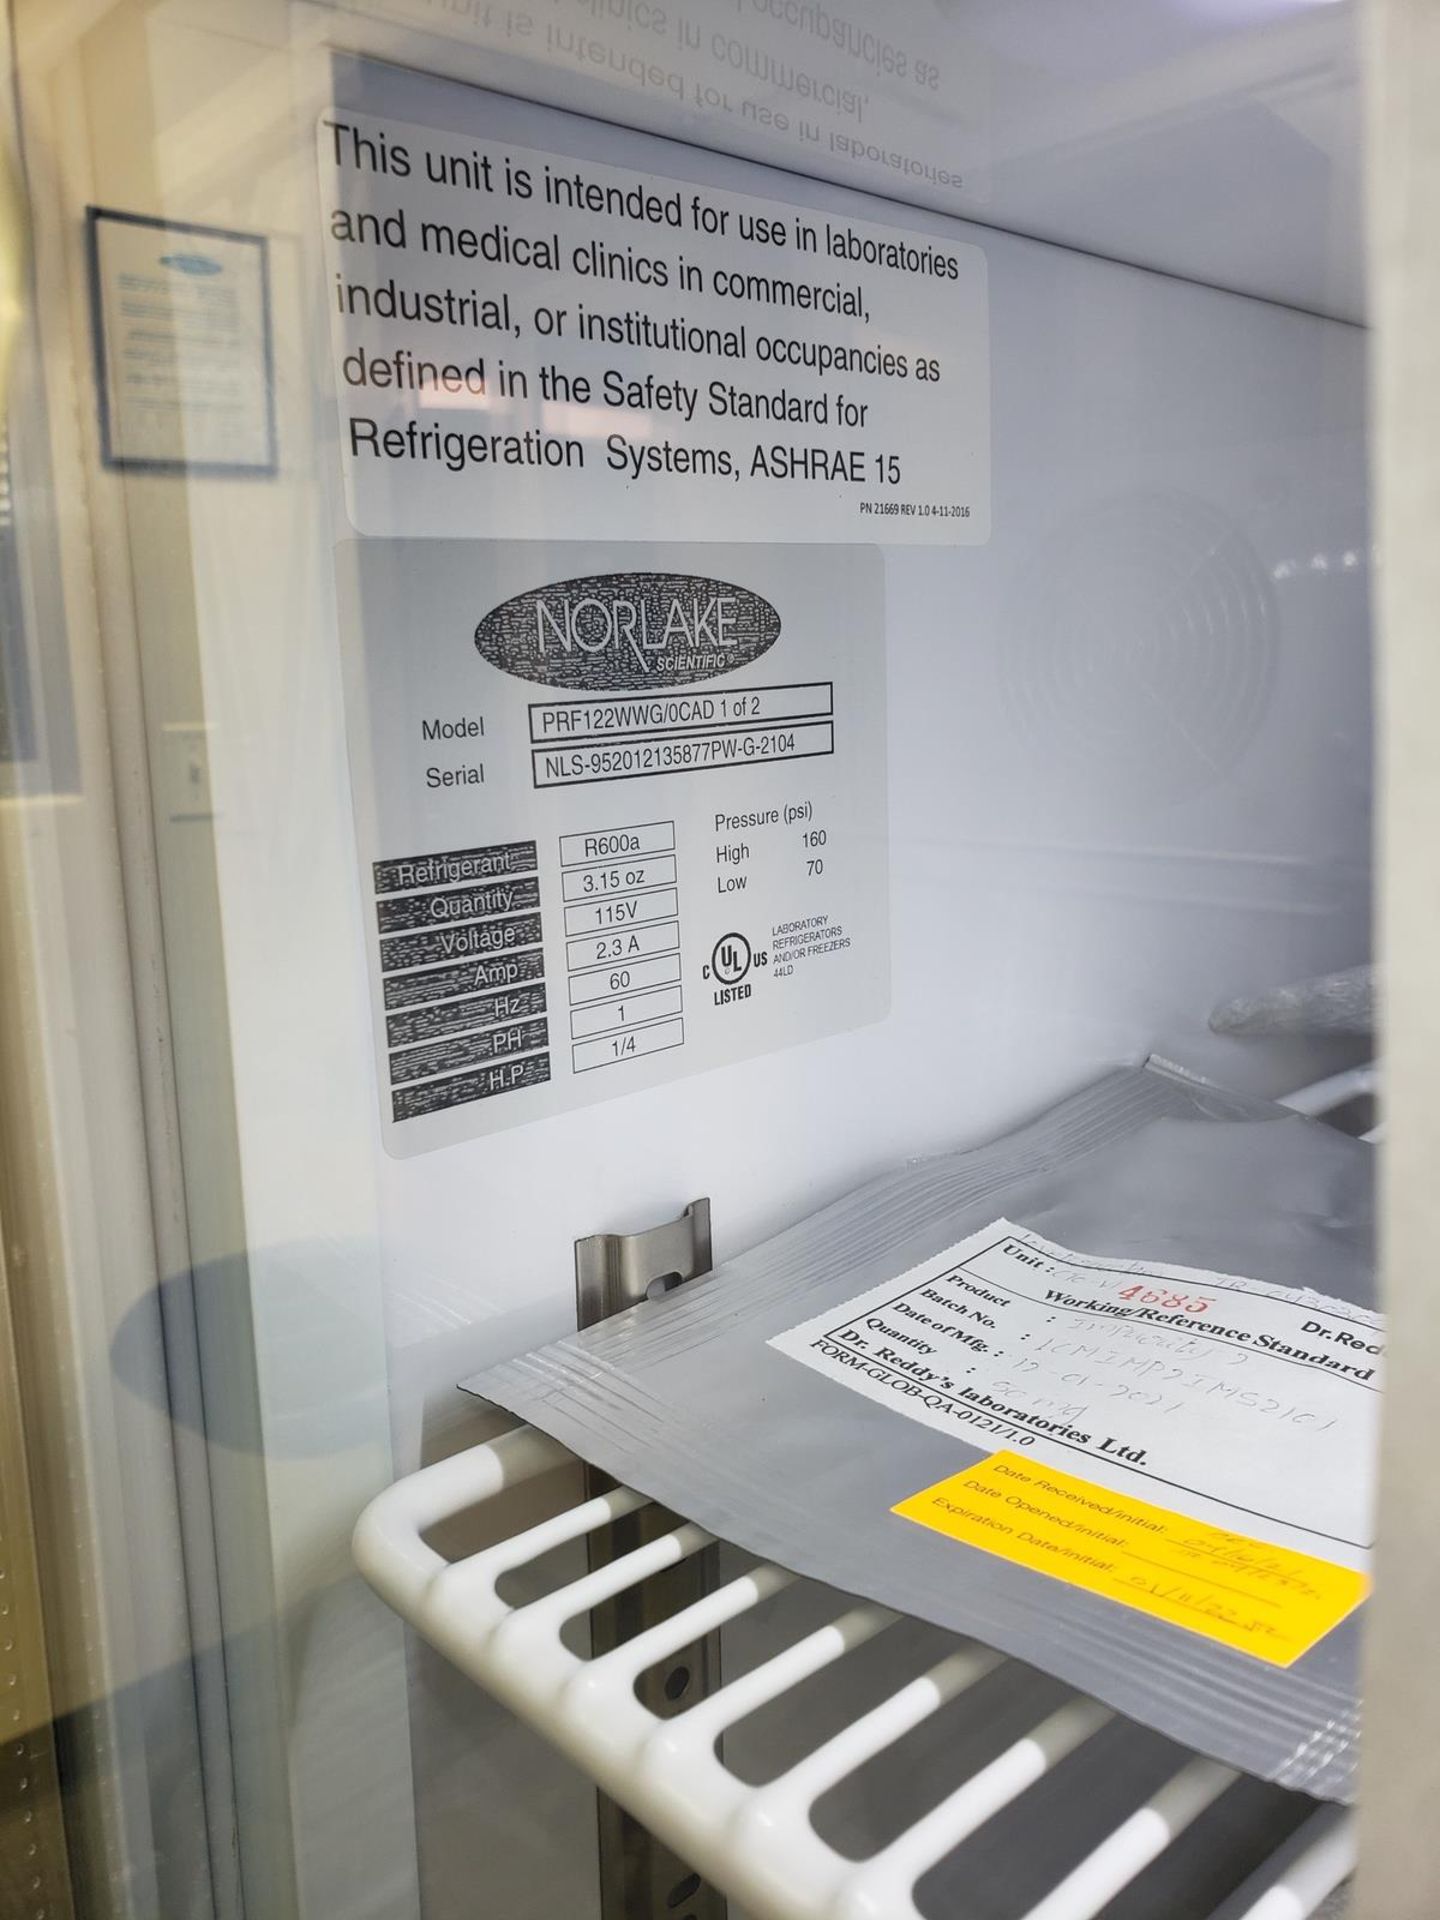 Norlake Scientific Refrigerator, M# PRF122WWG/0CAD, S/N NLS-952012135877PW-G-2104 - Image 2 of 2